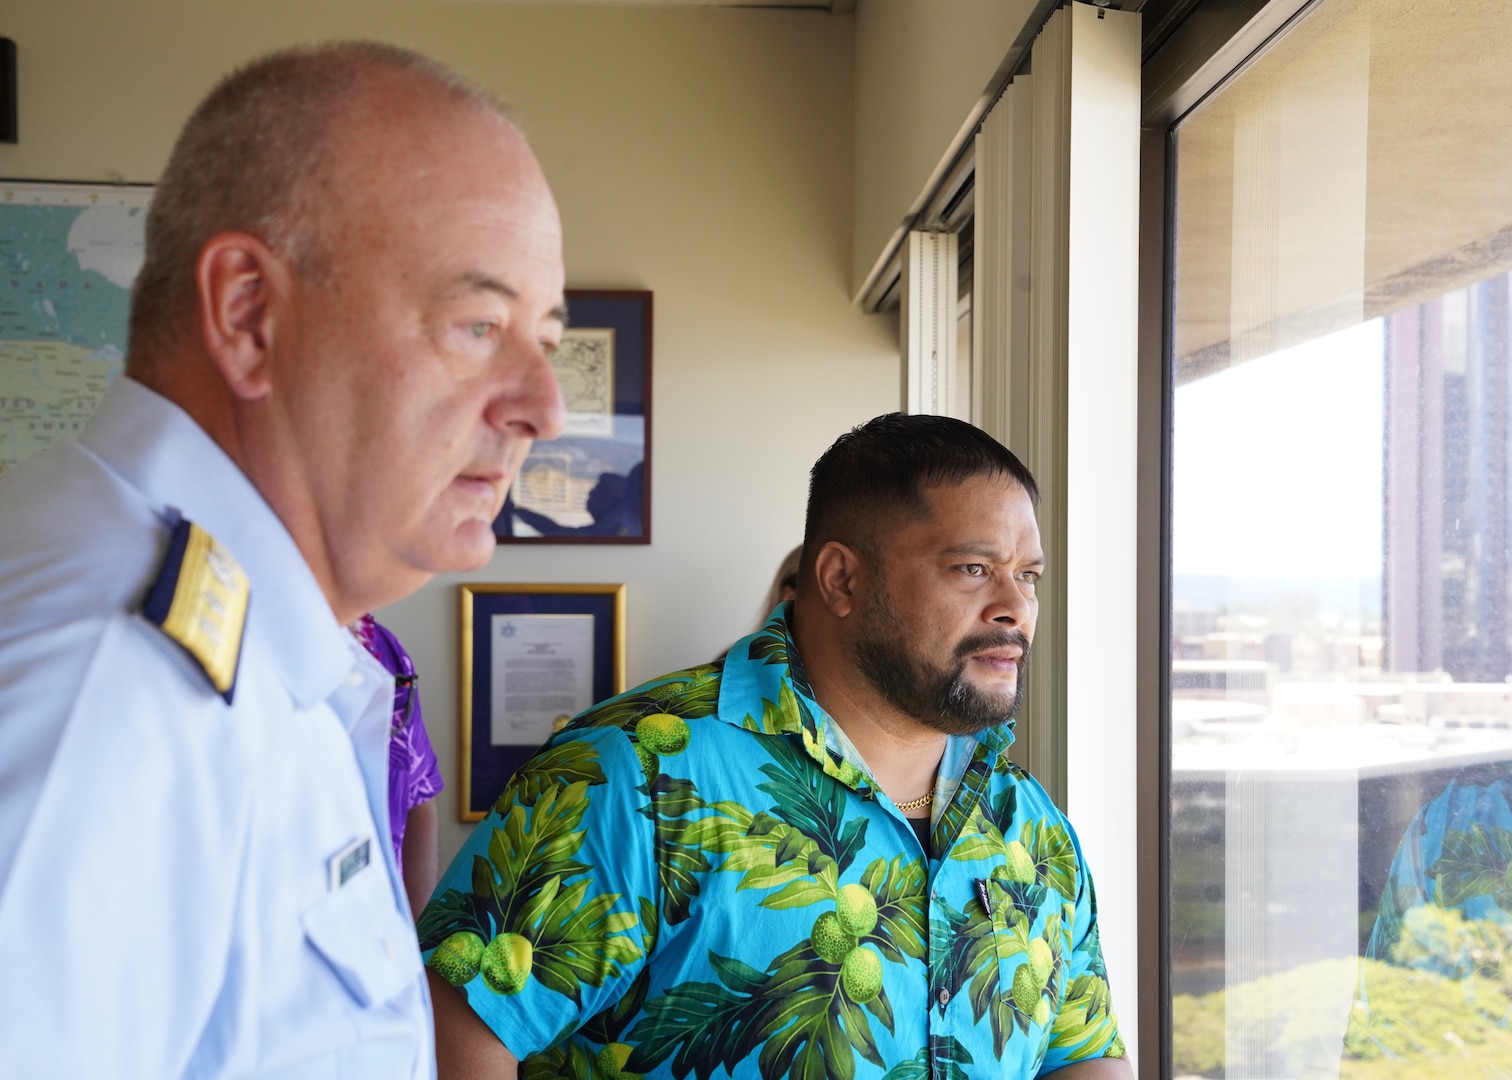 The Nauru President and his delegation visited United States Department of Defense agencies including the United States Indo-Pacific Command in addition to meeting with members from the East-West Center and the The Daniel K. Inouye Asia-Pacific Center for Security Studies during their 5-day visit.